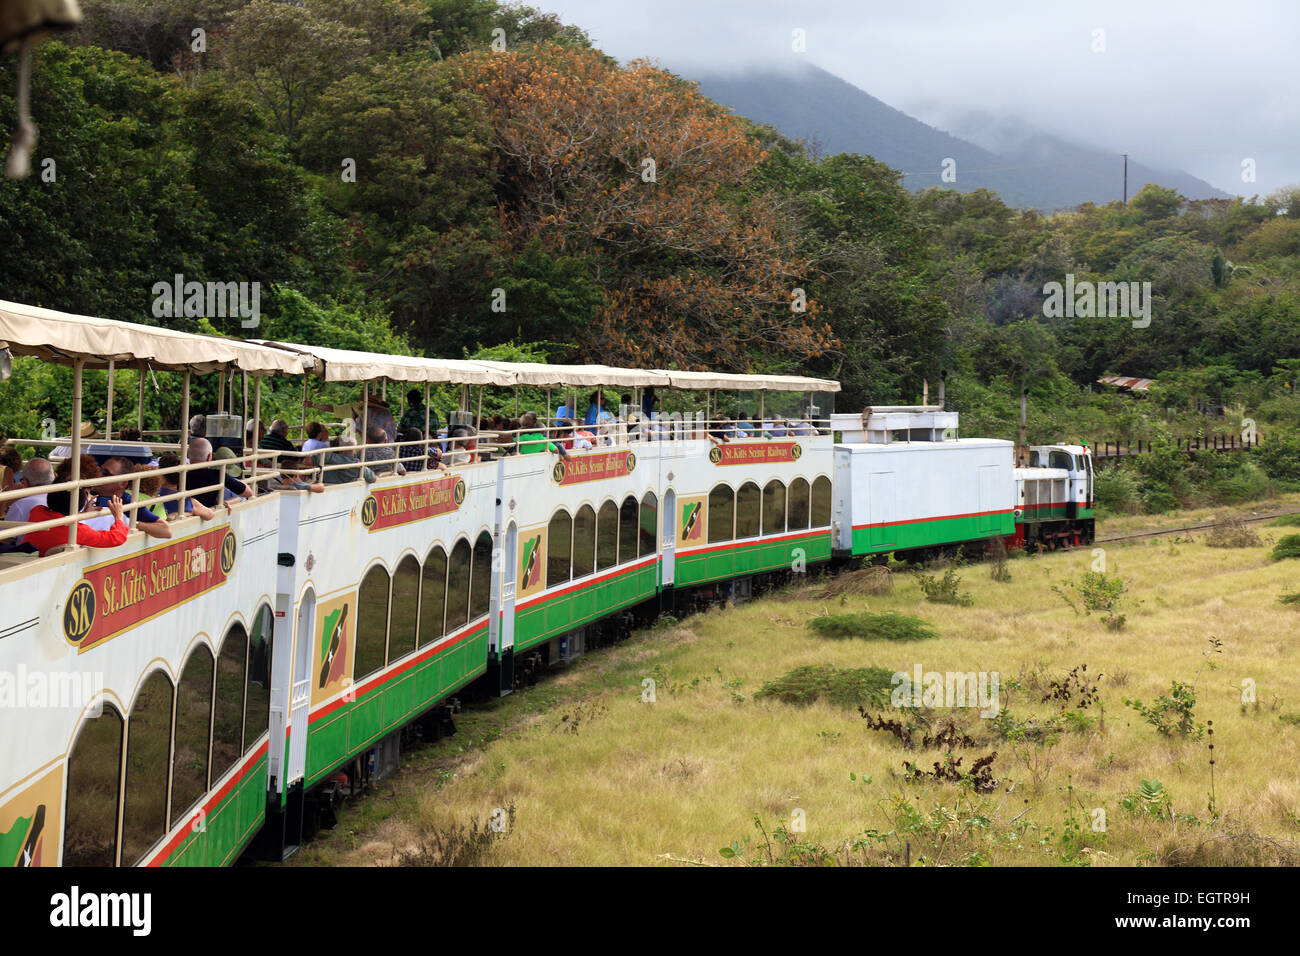 Scenic Railway Train that takes tourists for a ride through the old Sugar Plantations in Saint Kitts, Caribbean Stock Photo